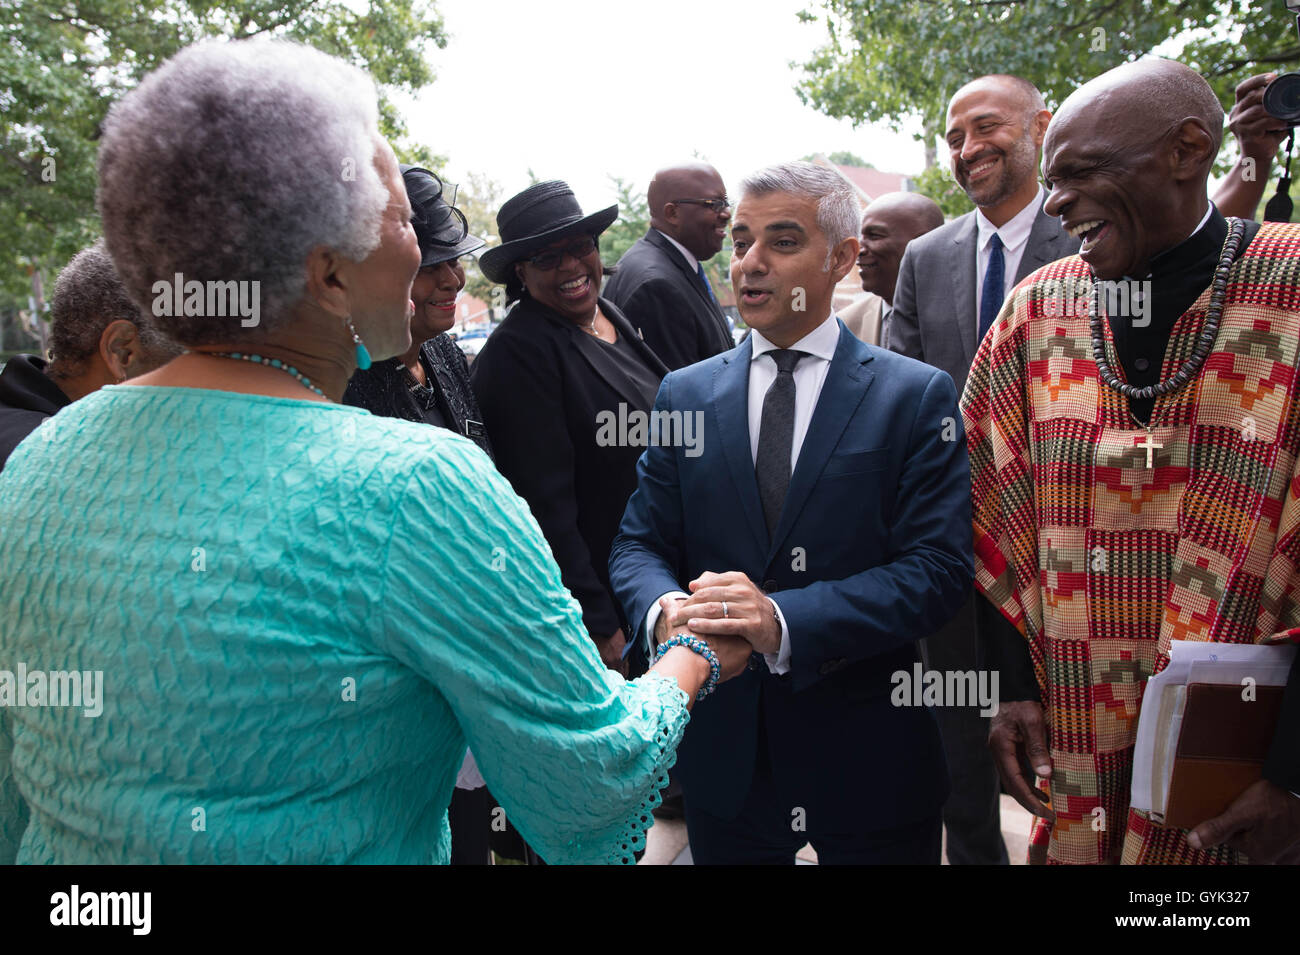 Mayor of London Sadiq Khan meets members of the congregation at the St Albans Congregational Church in Queens, New York City (NYC) during a three day visit to the US capital as part of his visit to North America. Stock Photo